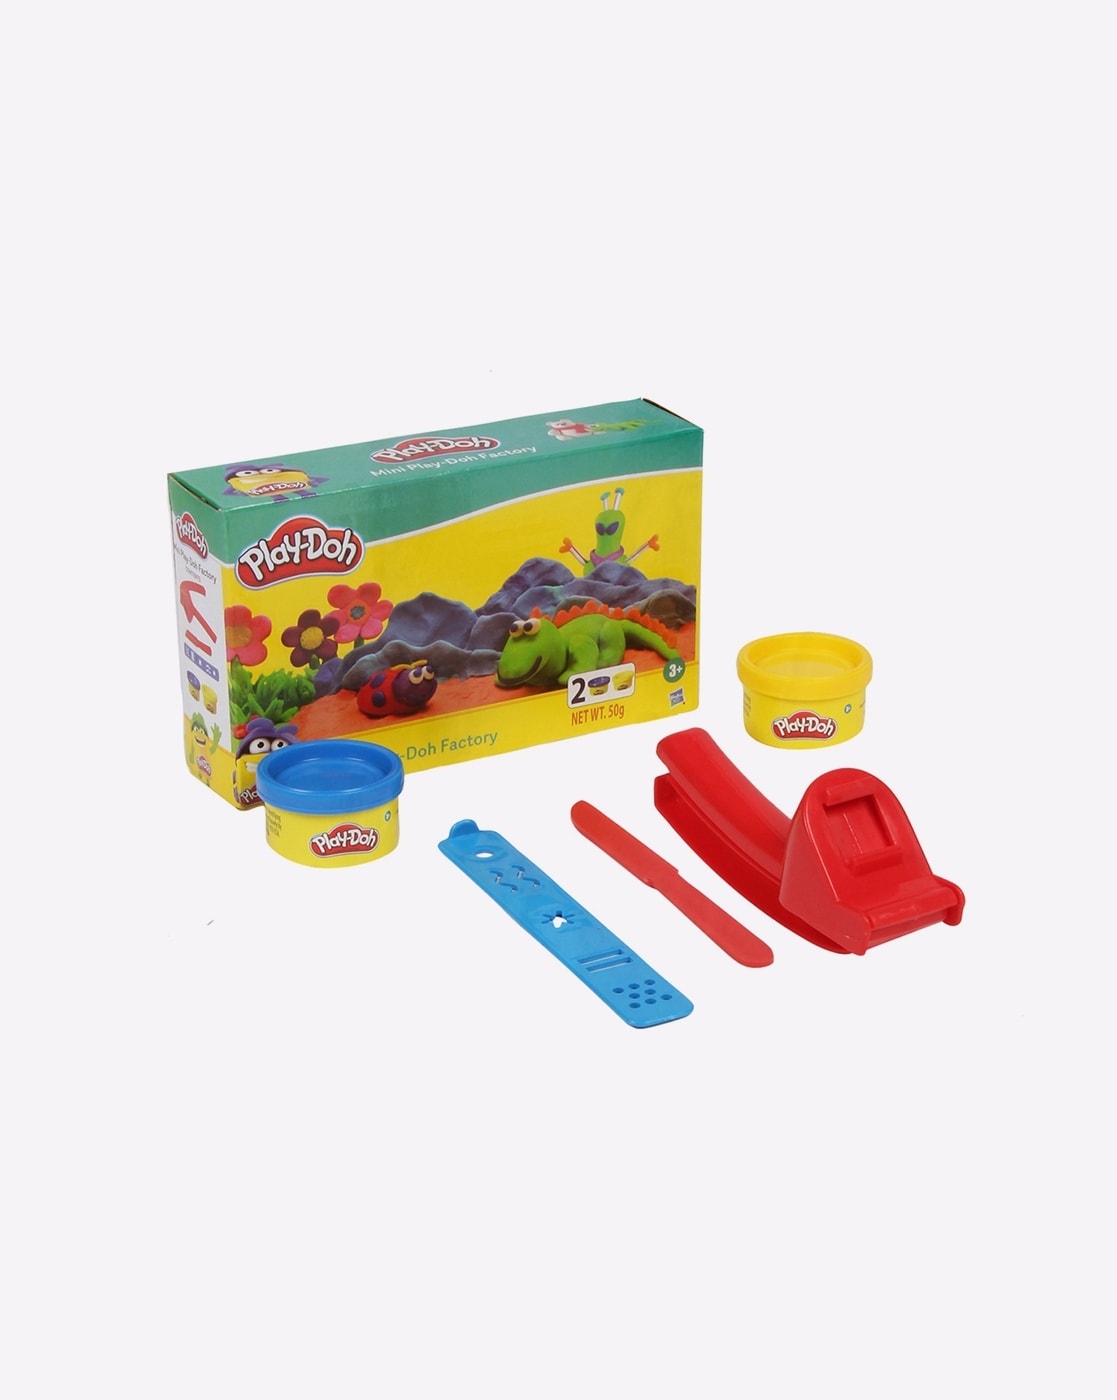 Play4Hours Play-Doh Mini Classics Assortment, Pack of 24